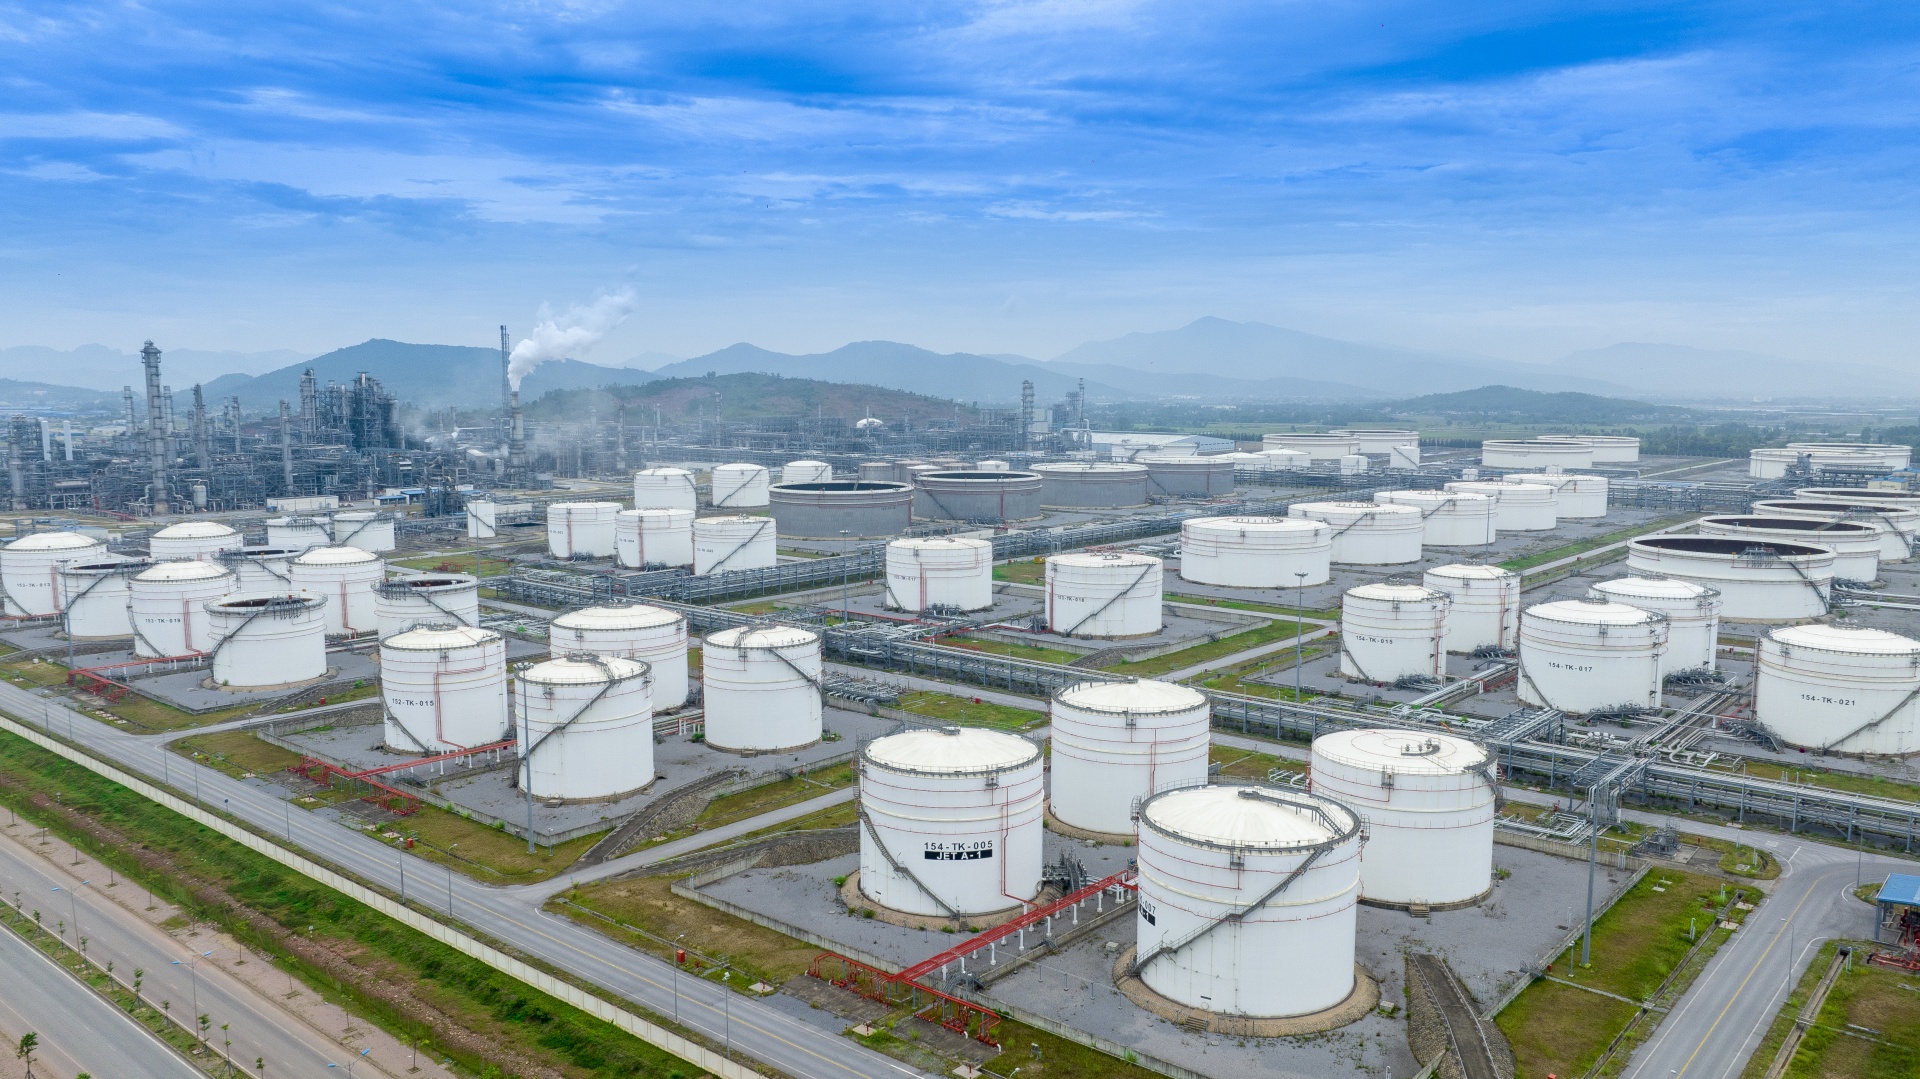 Nghi Son Refinery and Petrochemical remains committed to safety and stability